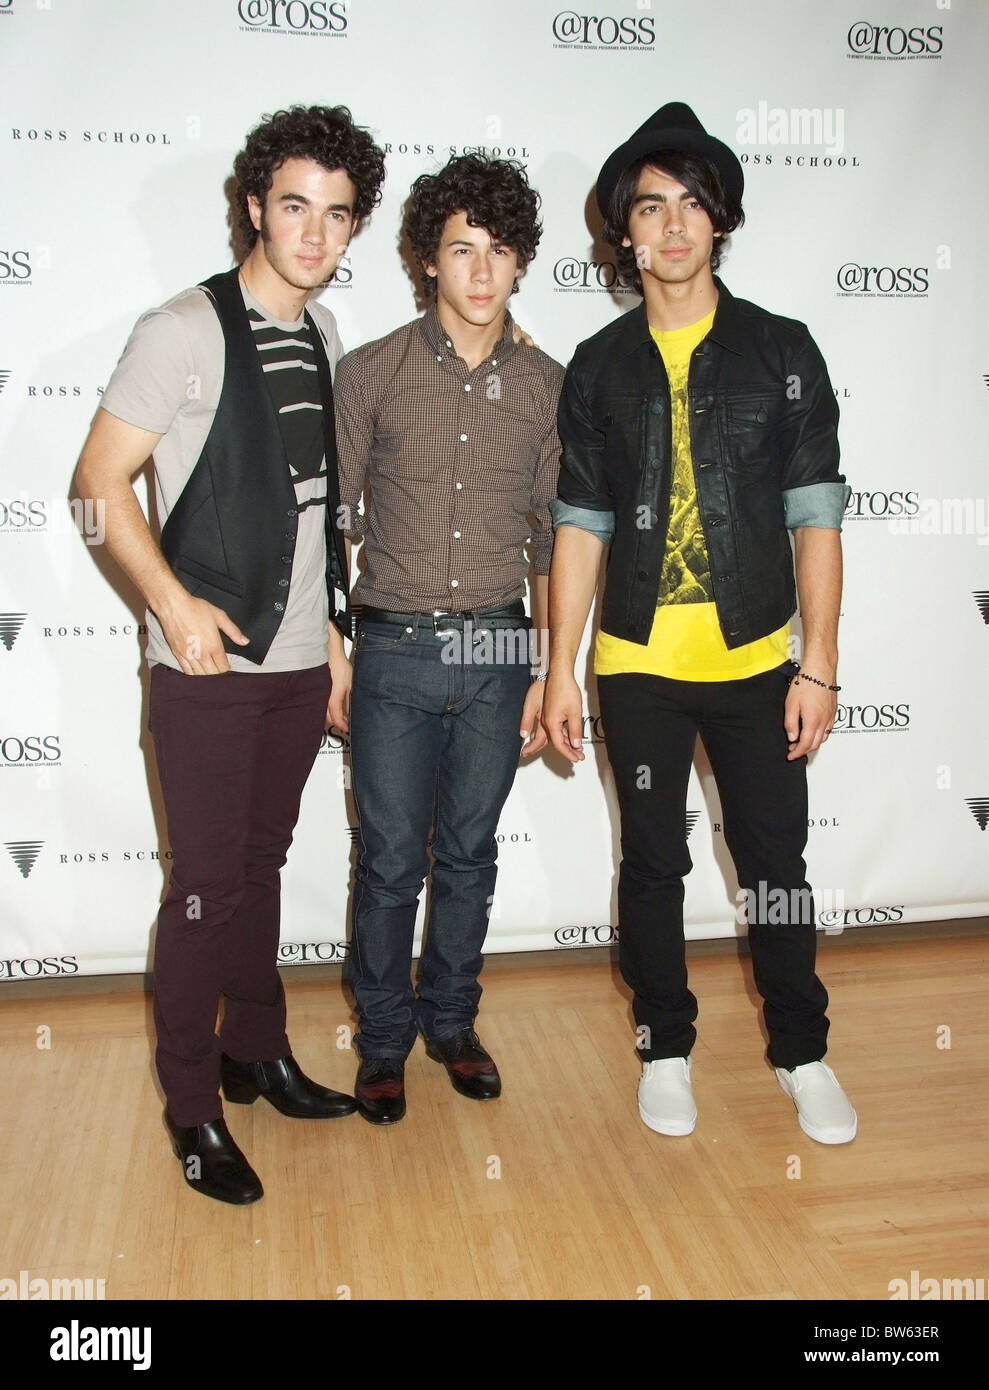 The Ross Summer Series Presents The Jonas Brothers Stock Photo - Alamy